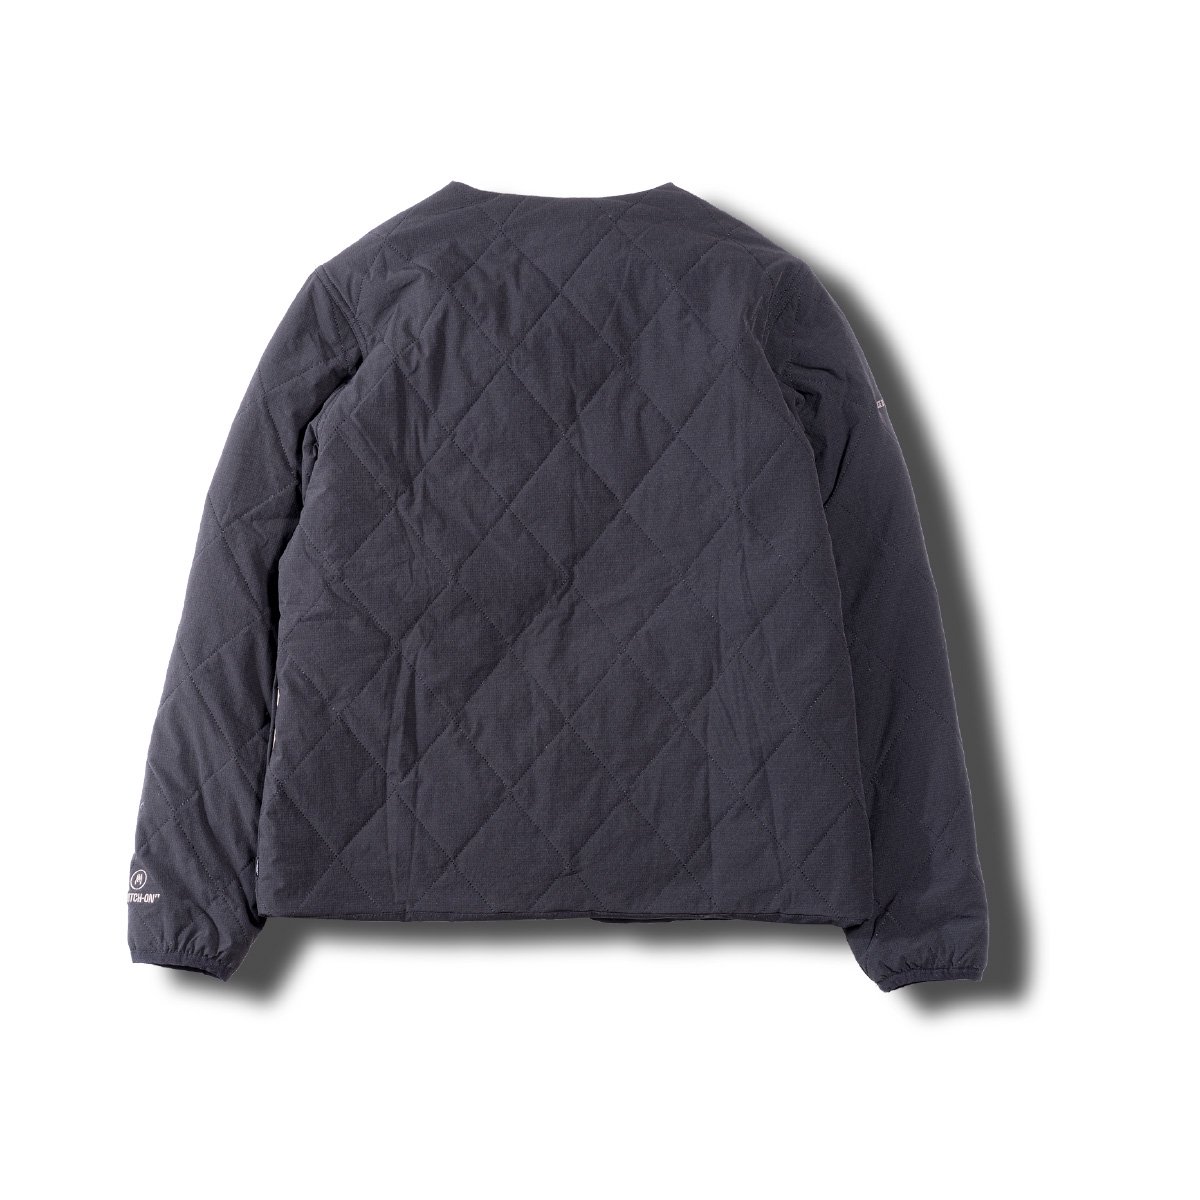 <img class='new_mark_img1' src='https://img.shop-pro.jp/img/new/icons15.gif' style='border:none;display:inline;margin:0px;padding:0px;width:auto;' />EZ quilt cardigan